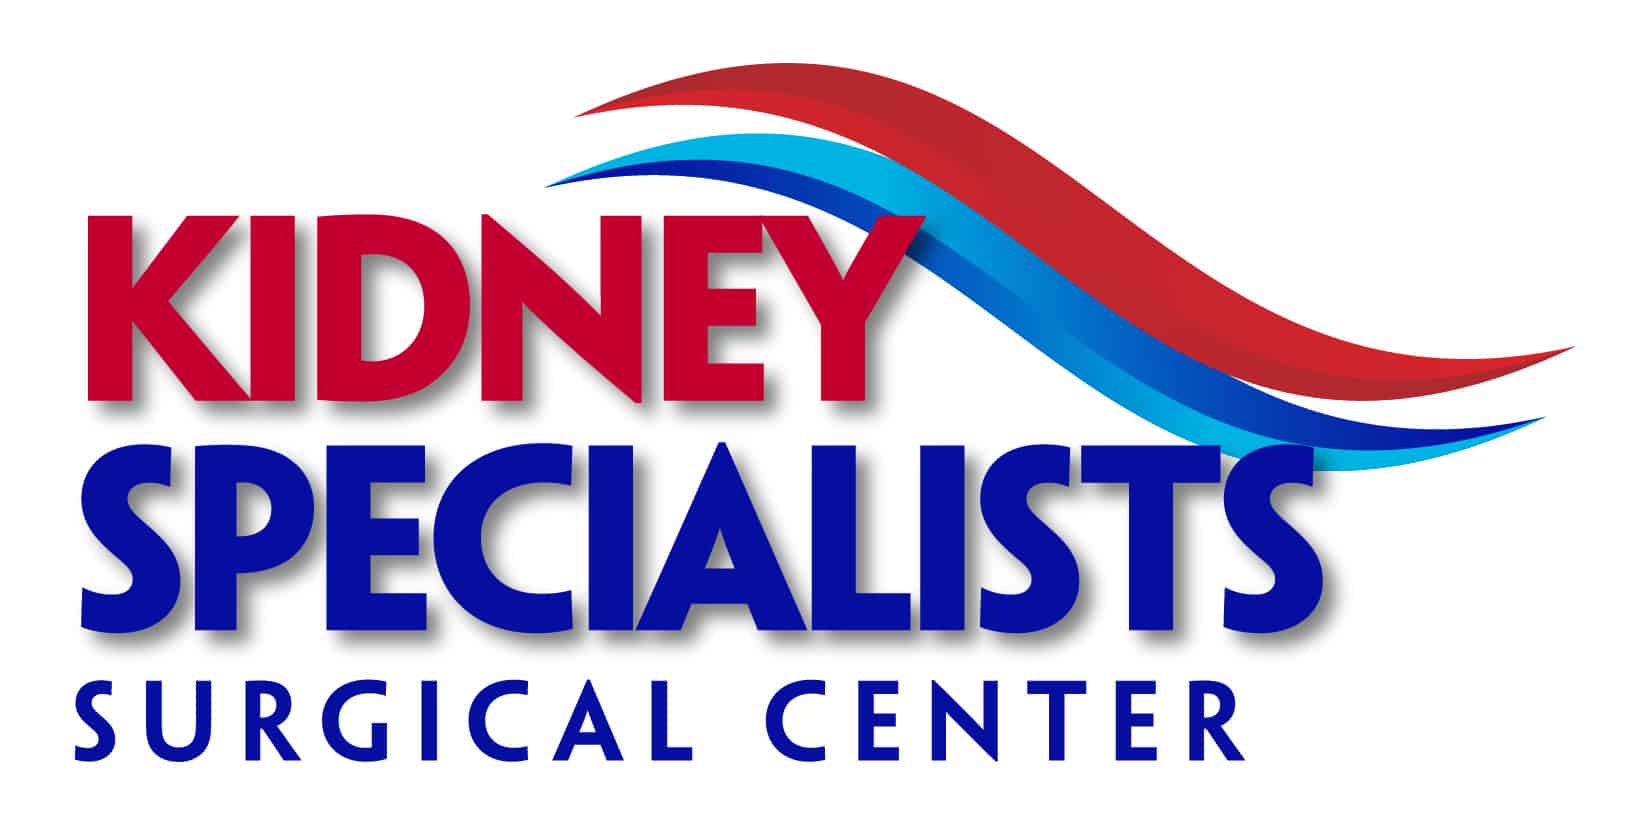 Kidney Specialists Surgical Center